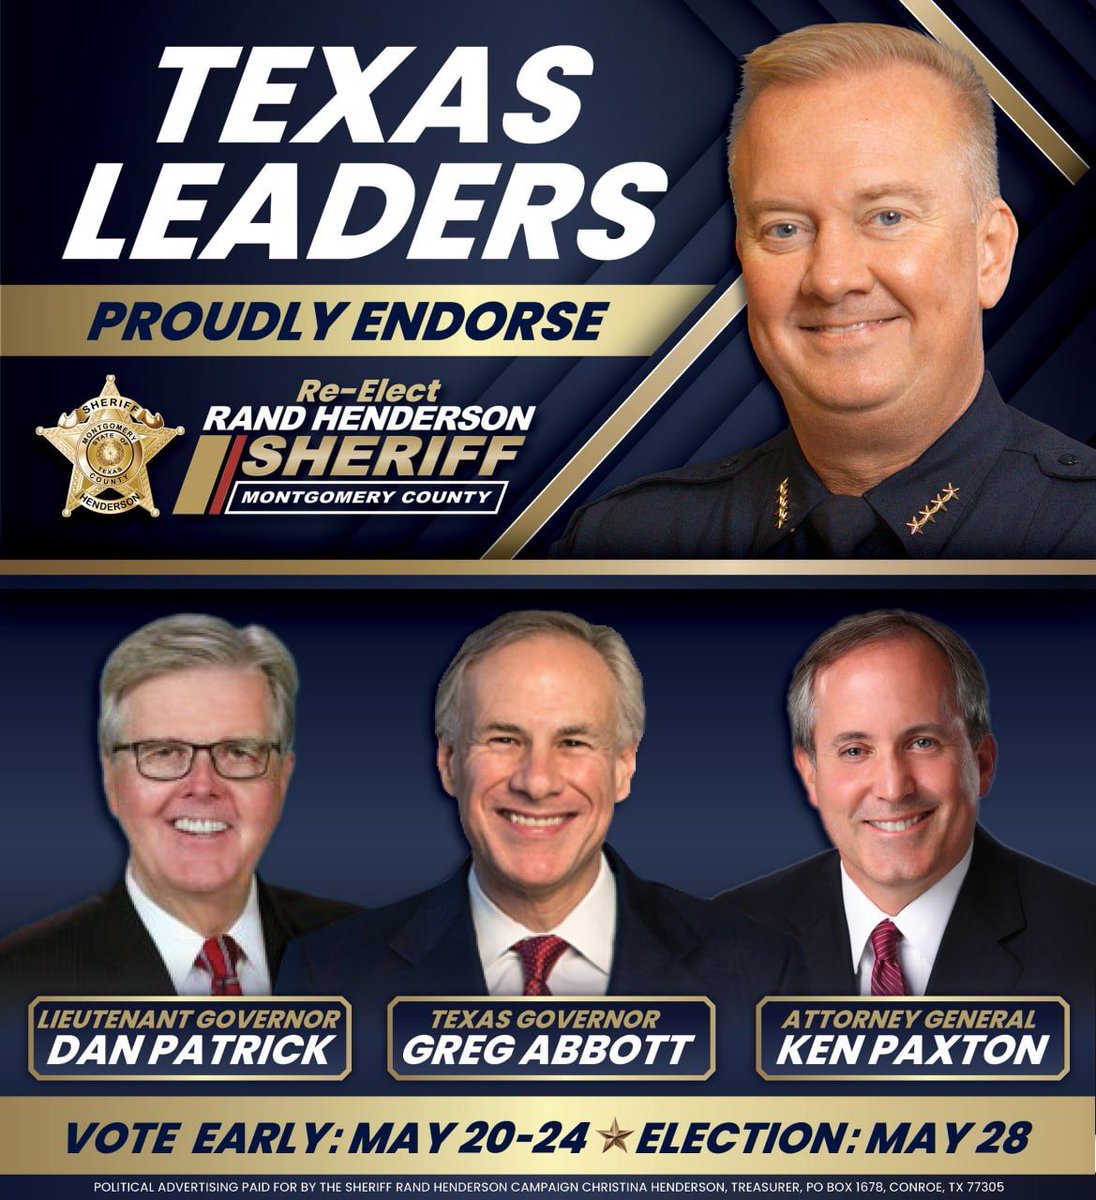 Humbled & grateful for the endorsements of Gov @GregAbbott_TX , Lt. Gov @DanPatrick , and Attorney General @KenPaxtonTX for my re-election. Their support fuels our mission to safeguard Texans' safety. Let's stand united against crime & protect our communities! #IStandWithRand